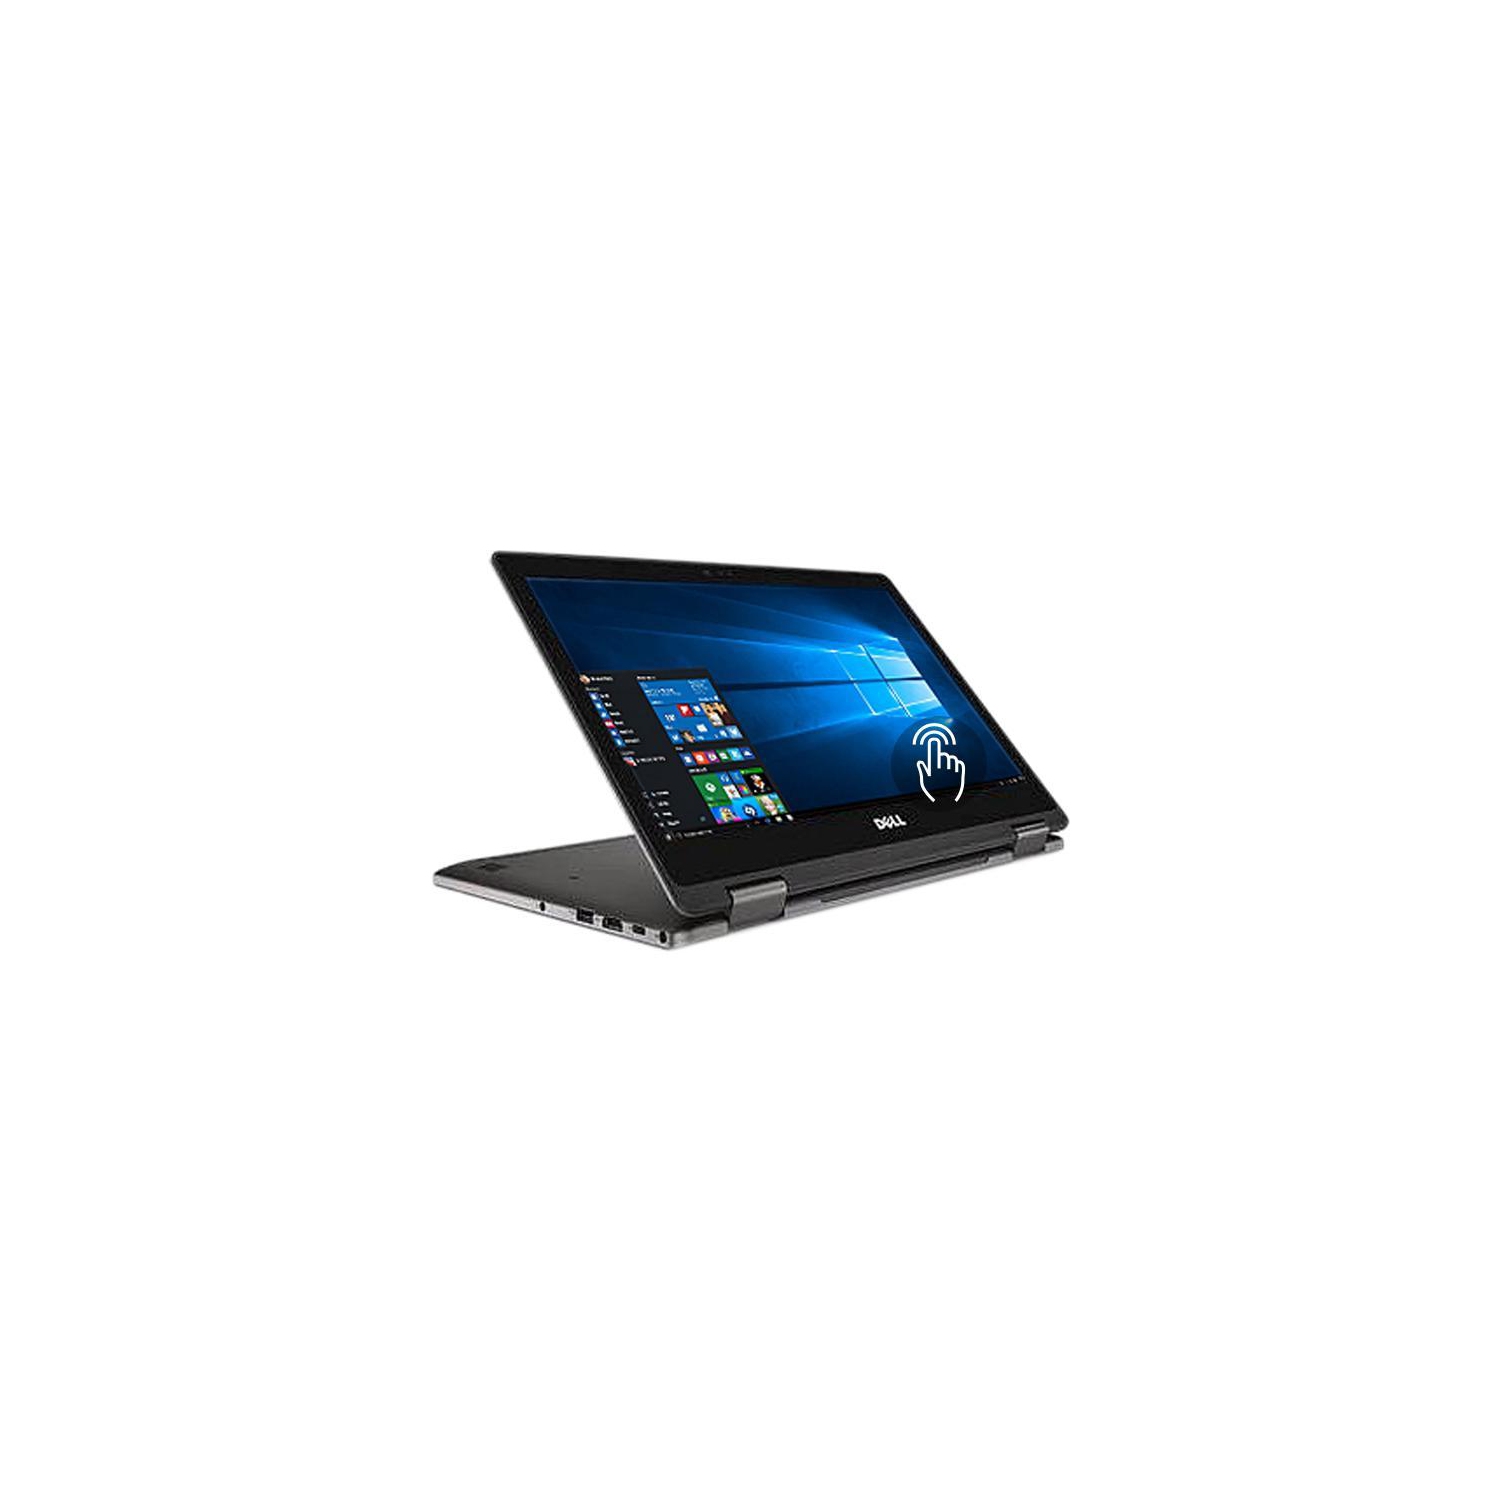 Refurbished(Good) - Dell INSPIRON 3379 2 IN 1 TOUCH SCREEN LAPTOP - 13.3" - Intel Core i5-6200U CPU @ 2.30GHz2.30 GHZ - 8.0 GB RAM - 256GB SSD